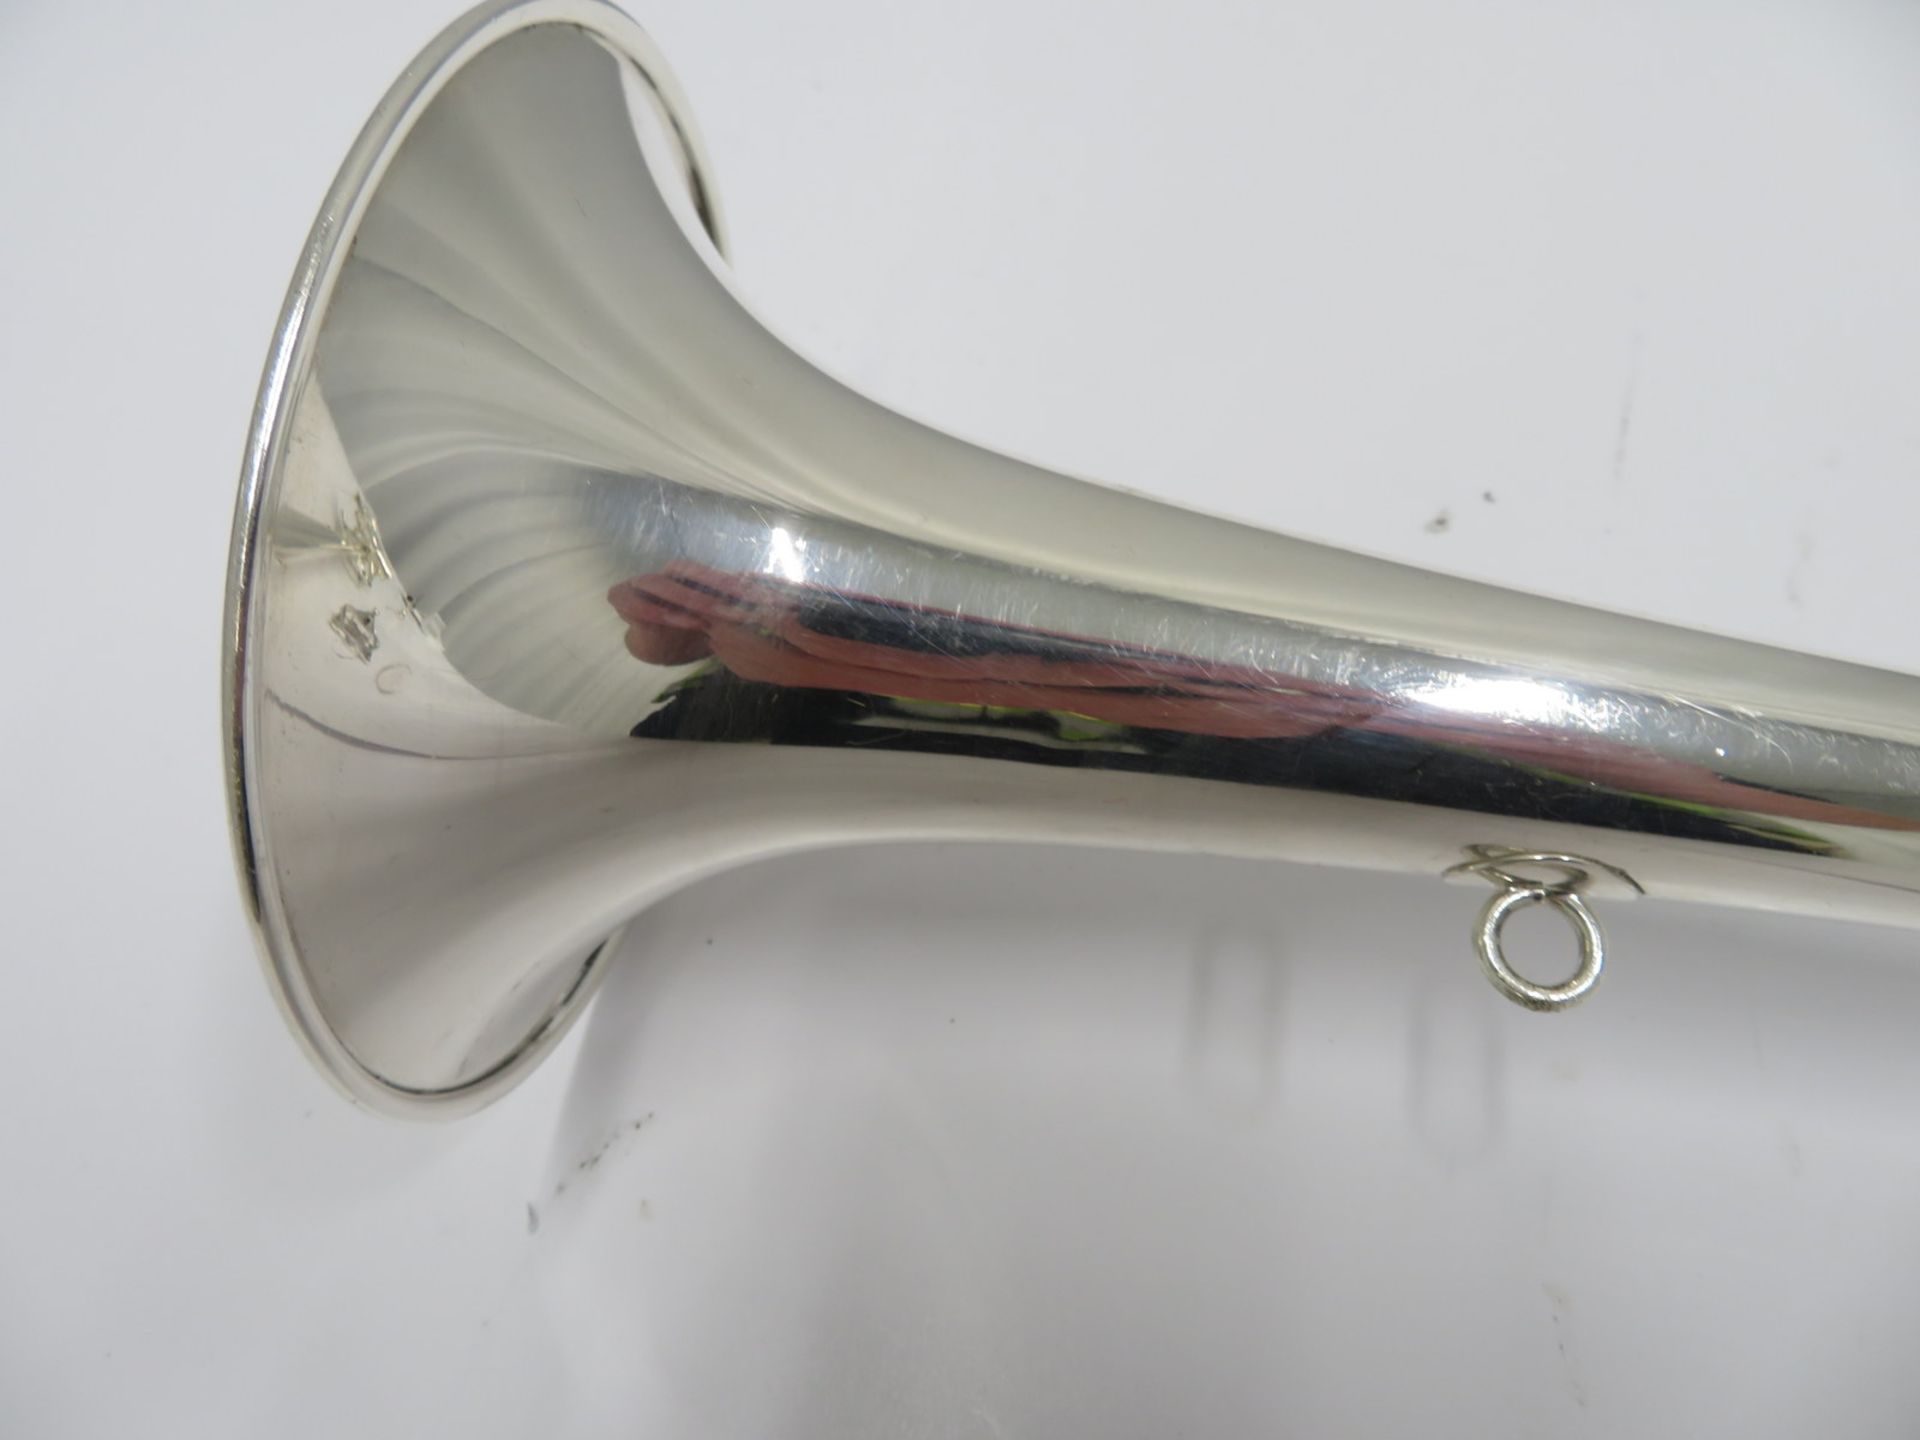 Besson BE706 International fanfare trumpet with case. Serial number: 885985. - Image 11 of 16